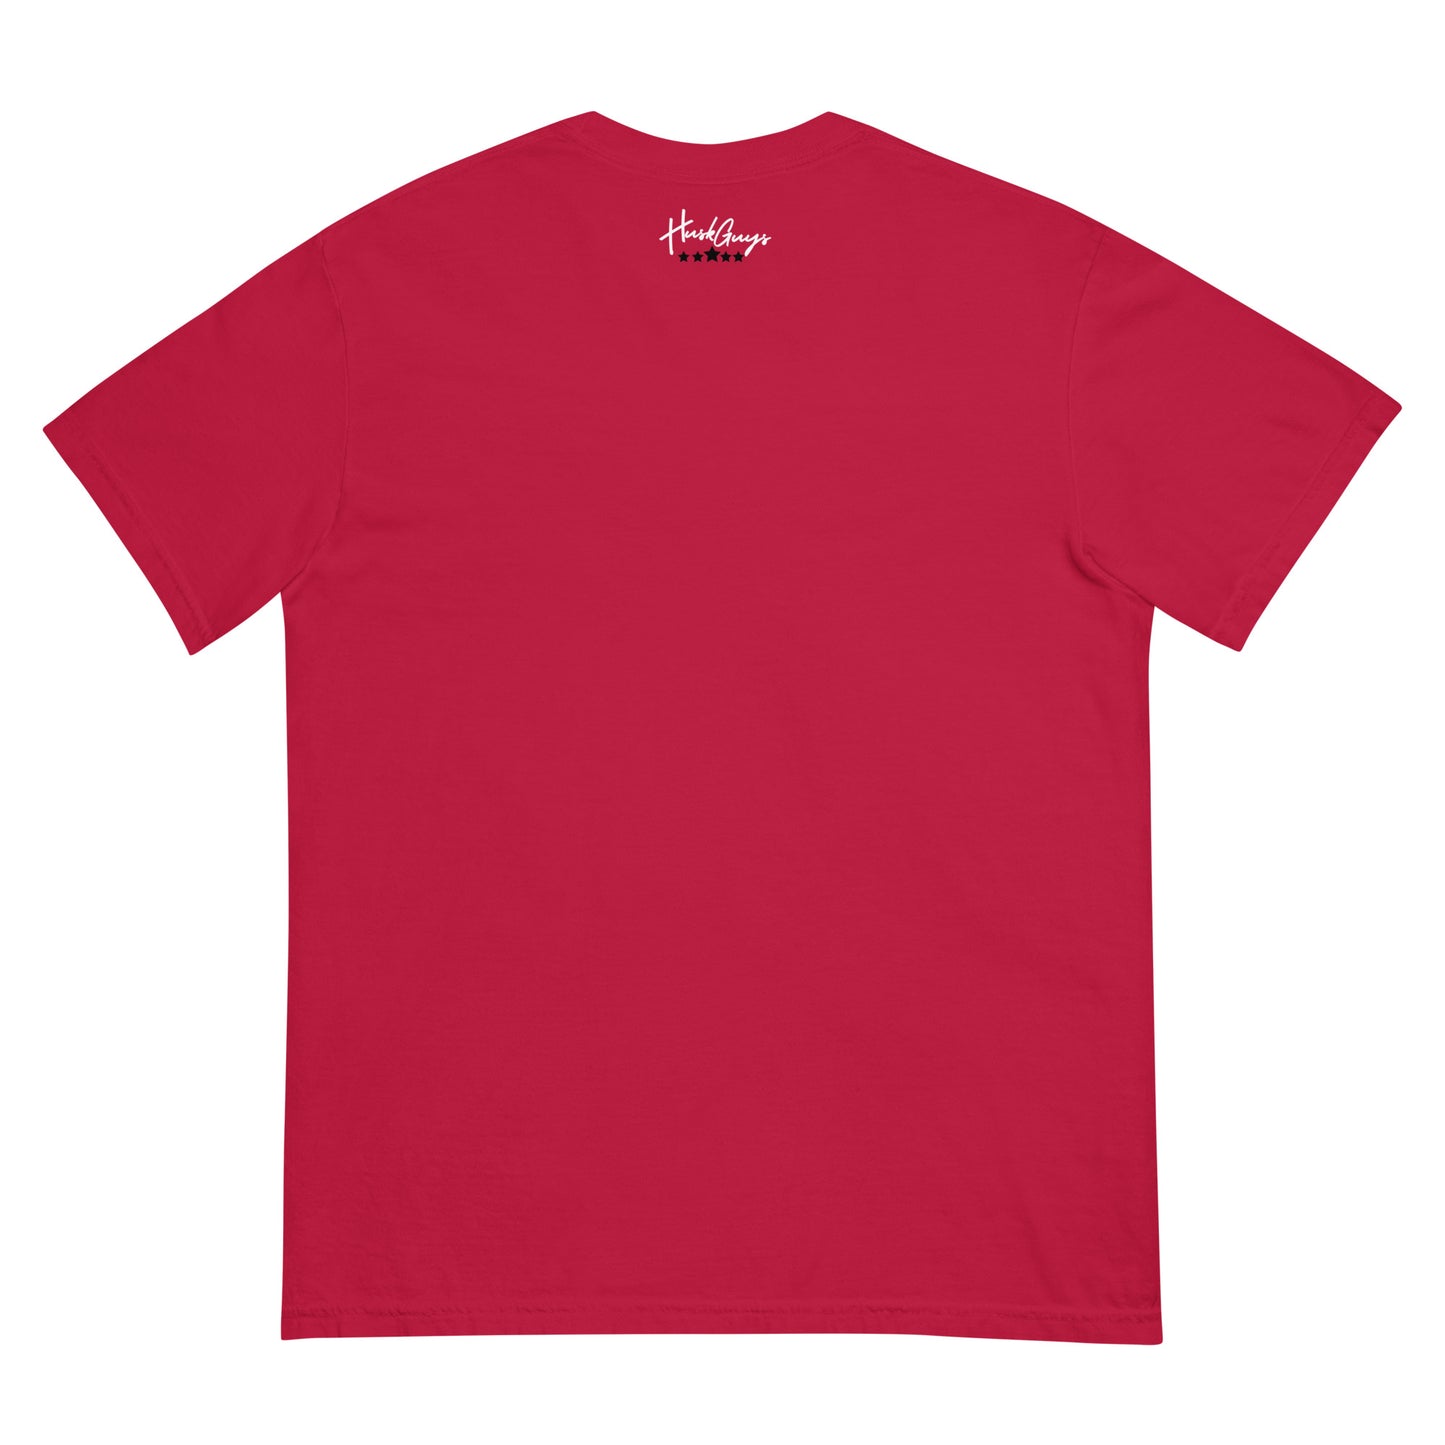 Sea of Red T-shirt